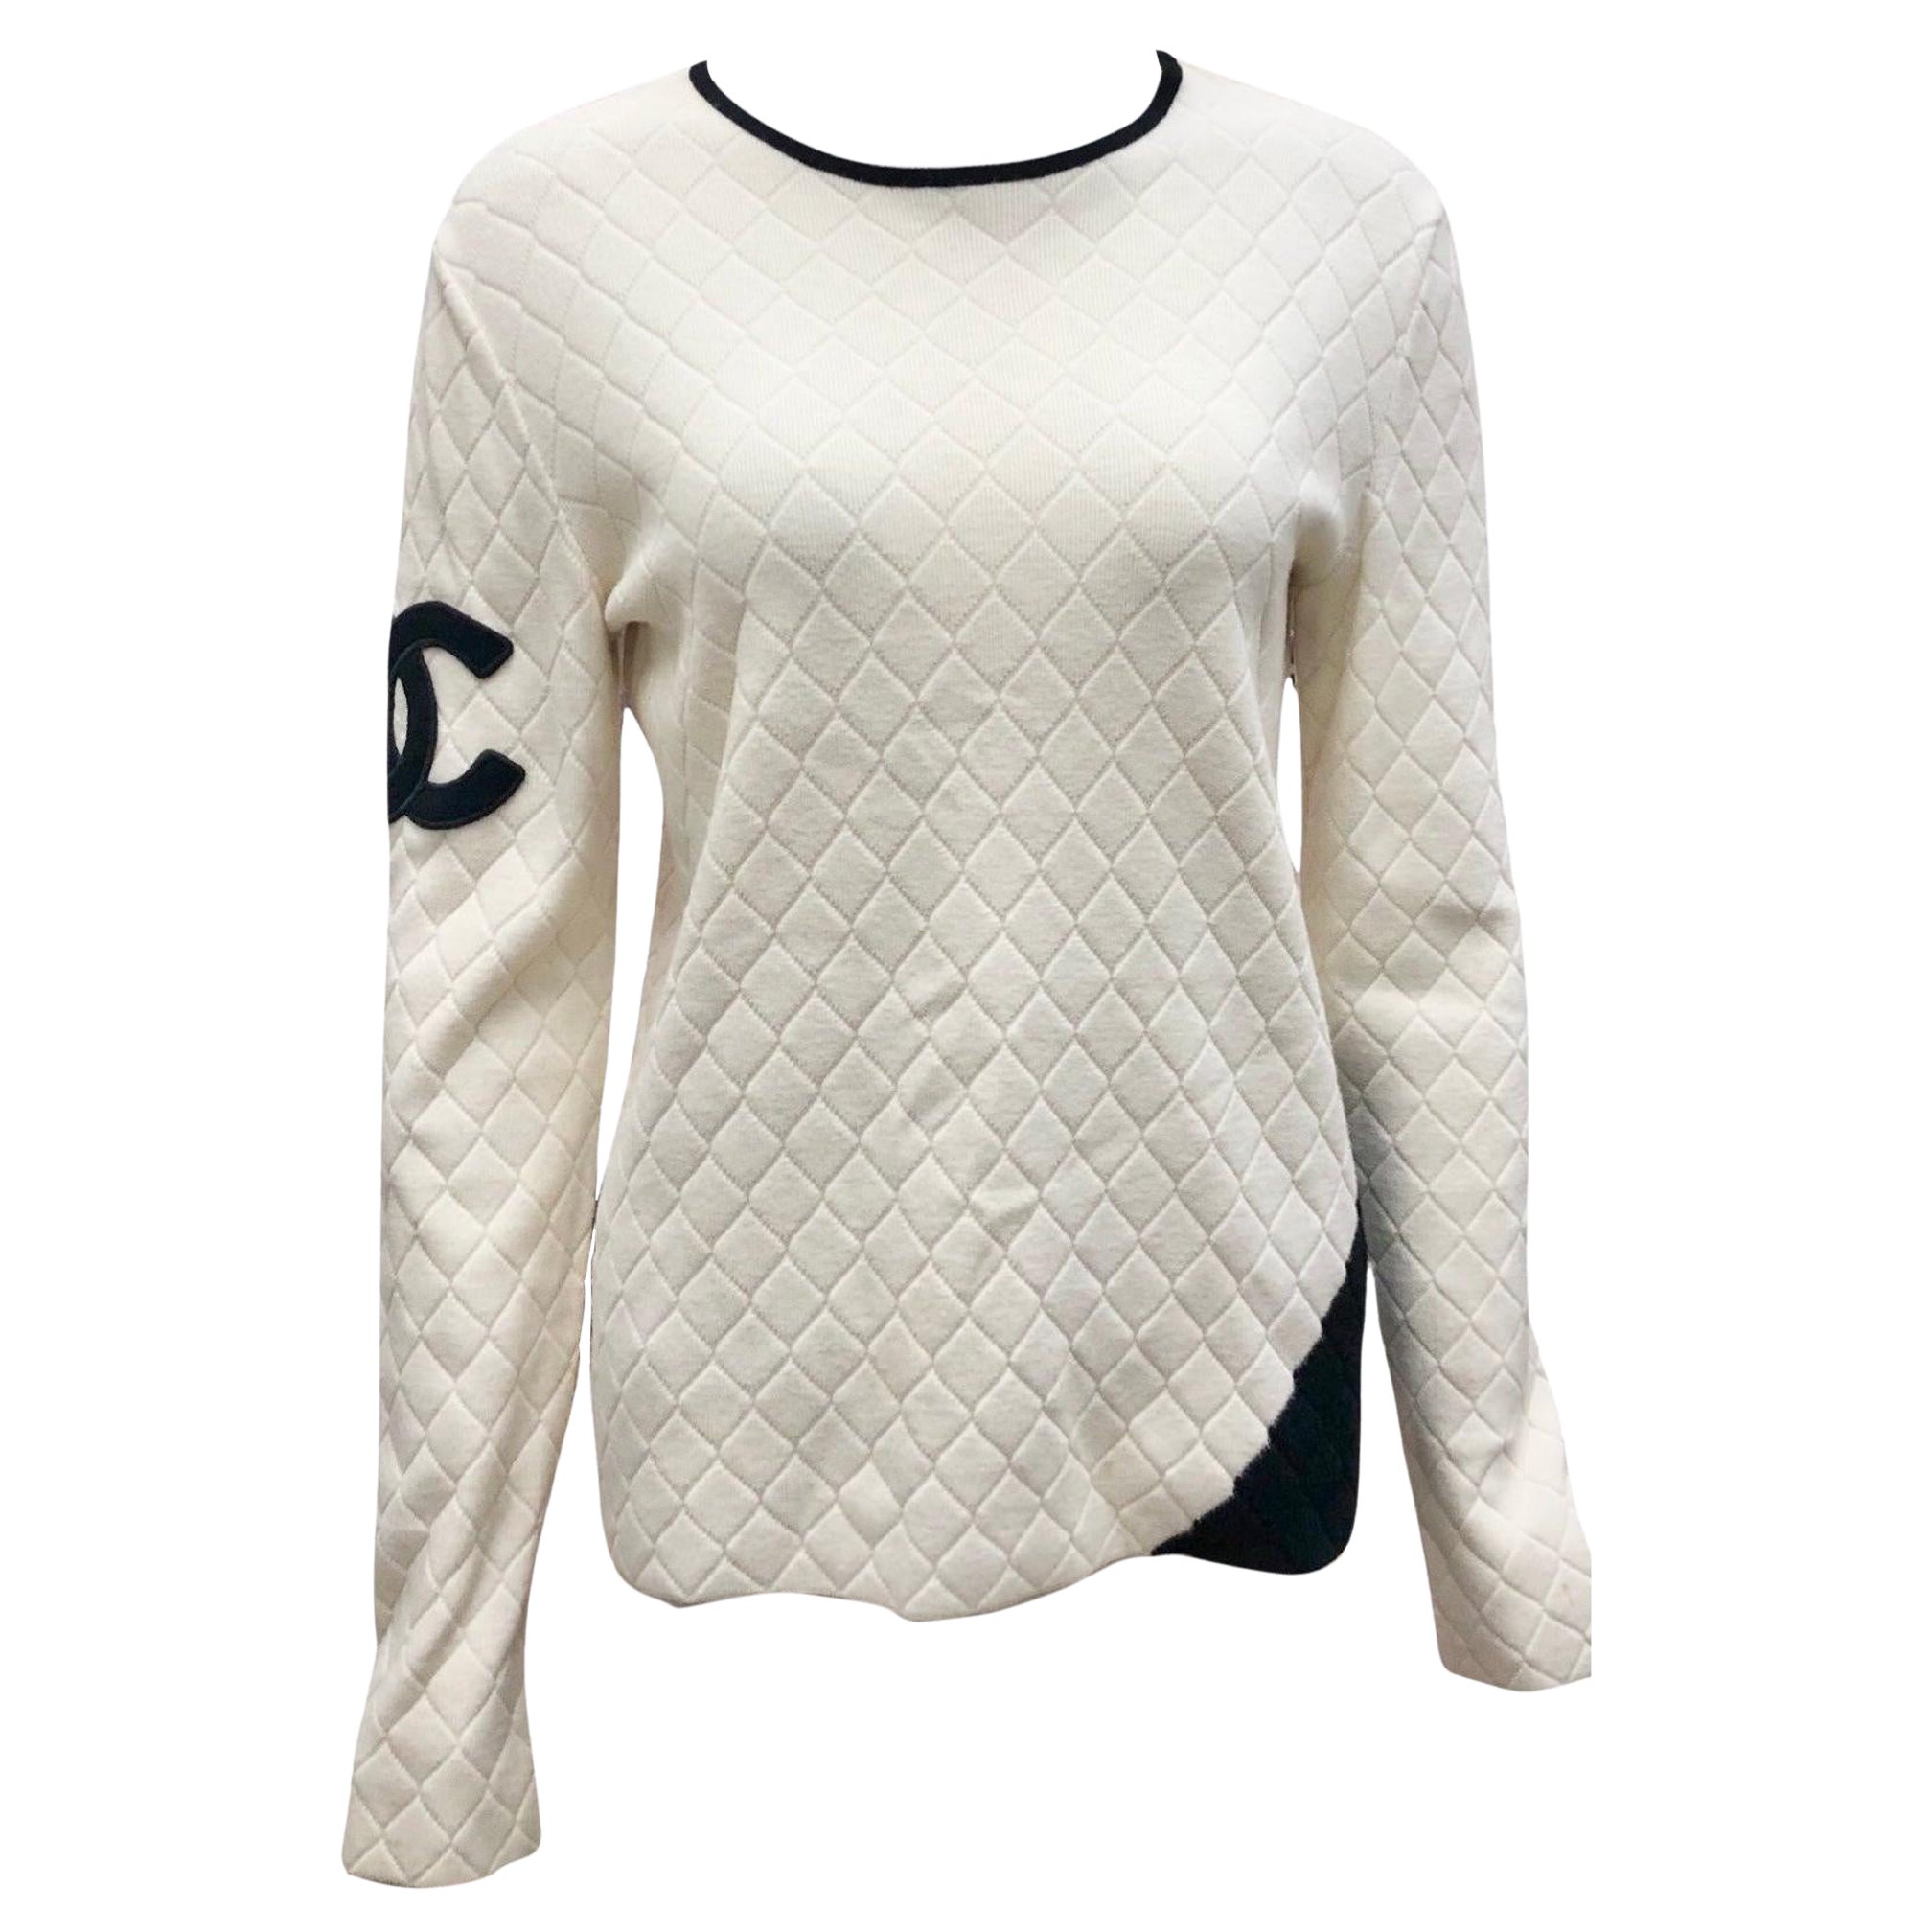 Chanel Cc Sweater - 141 For Sale on 1stDibs  chanel sweater, chanel cc logo  sweater, women chanel sweater